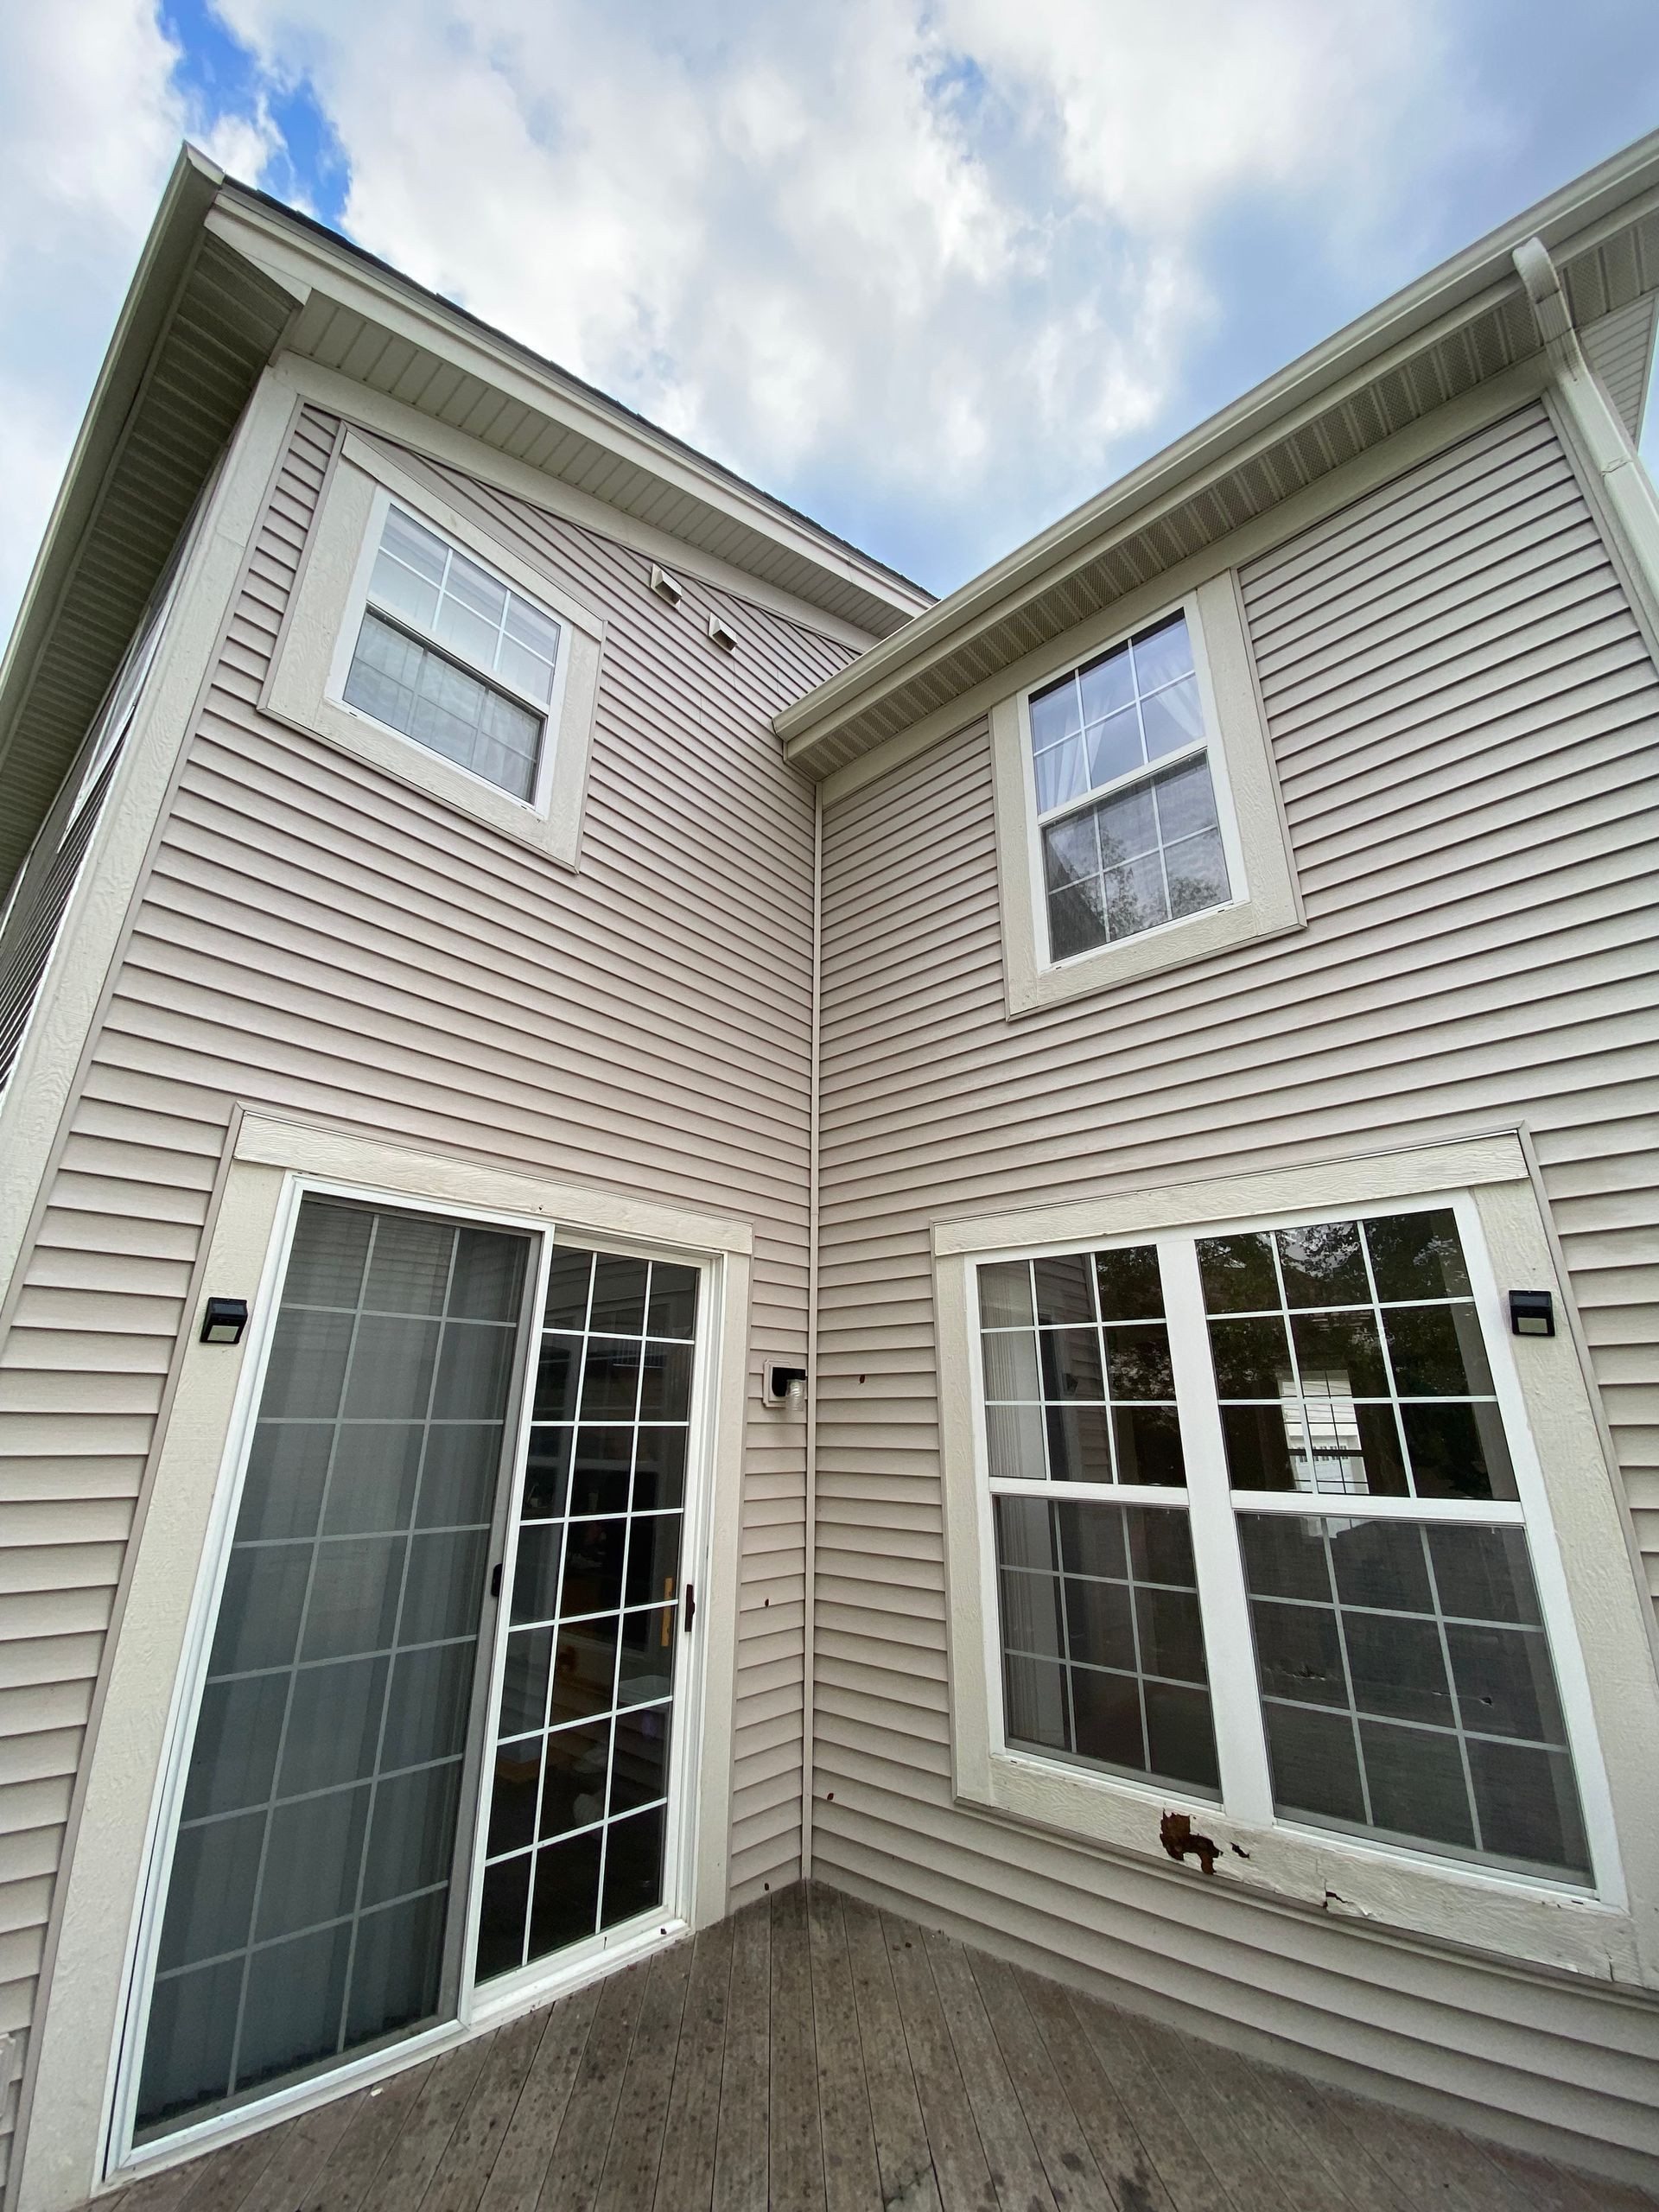 Clean Brown Siding - Lake Zurich, IL - Peter’s Power Wash Services